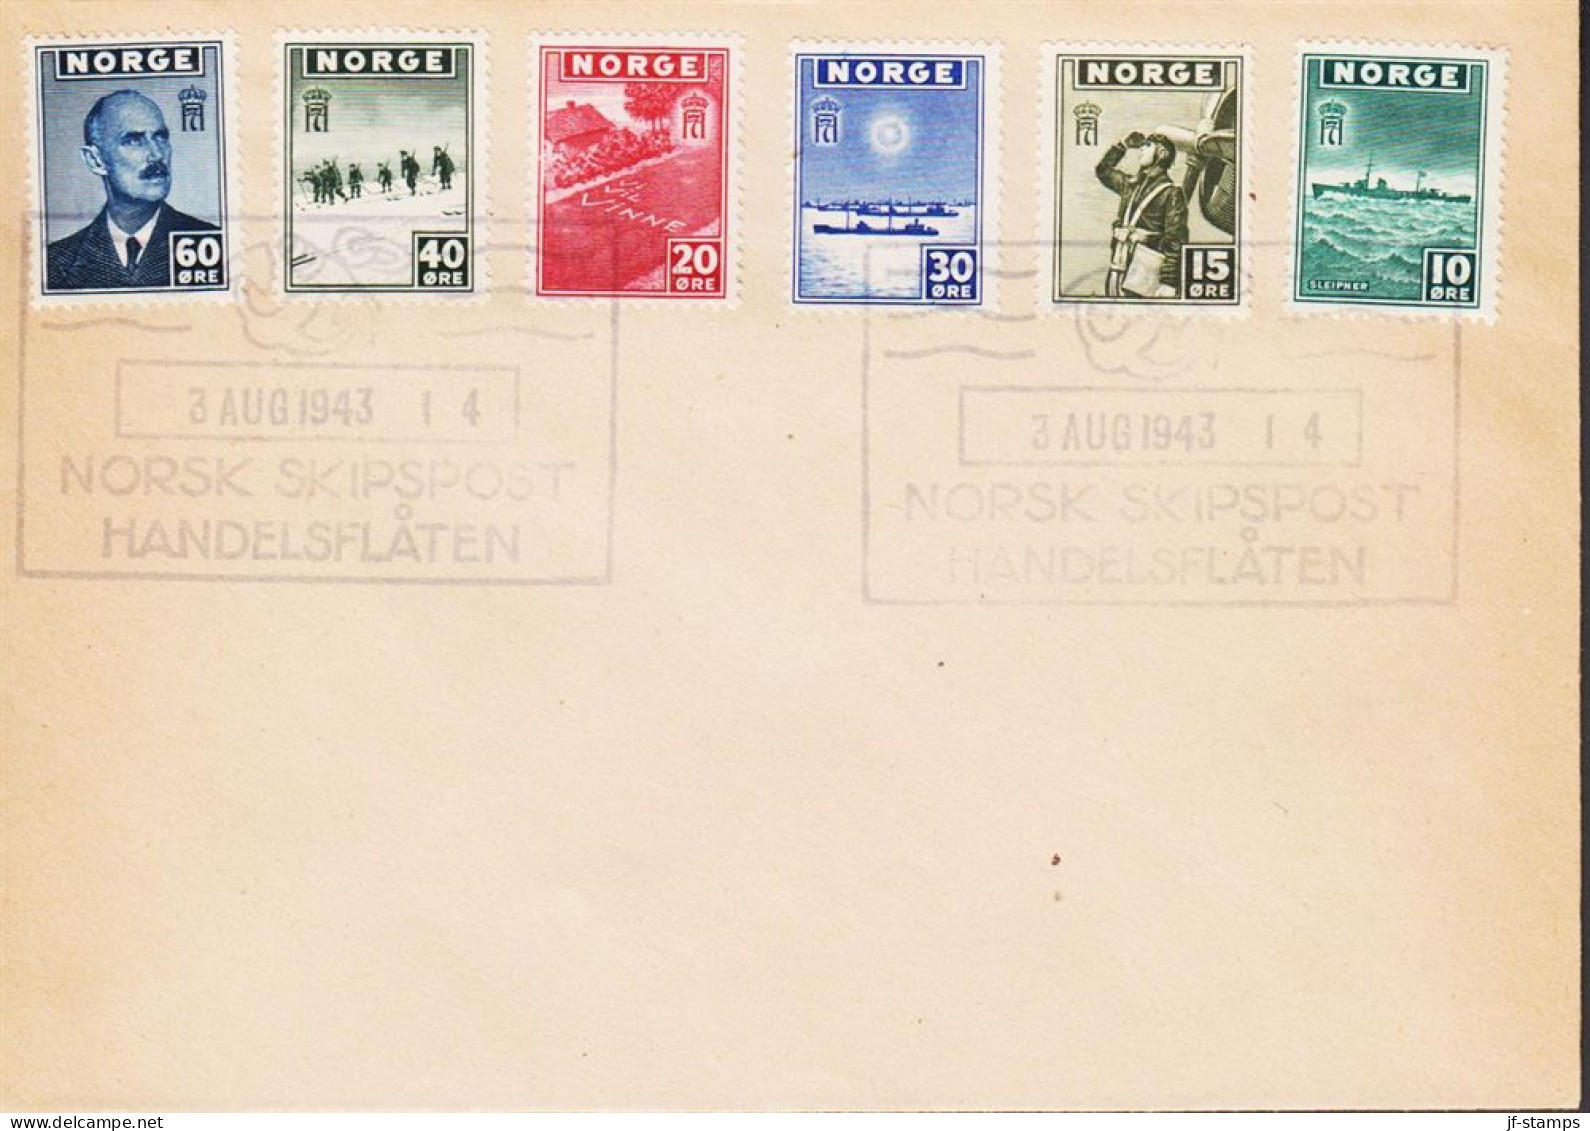 1943. NORGE. Fine Envelope With 10, 15, 20, 30 40 And 60 ØRE London Issue Cancelled With ... (Michel 278-283) - JF545675 - Cartas & Documentos